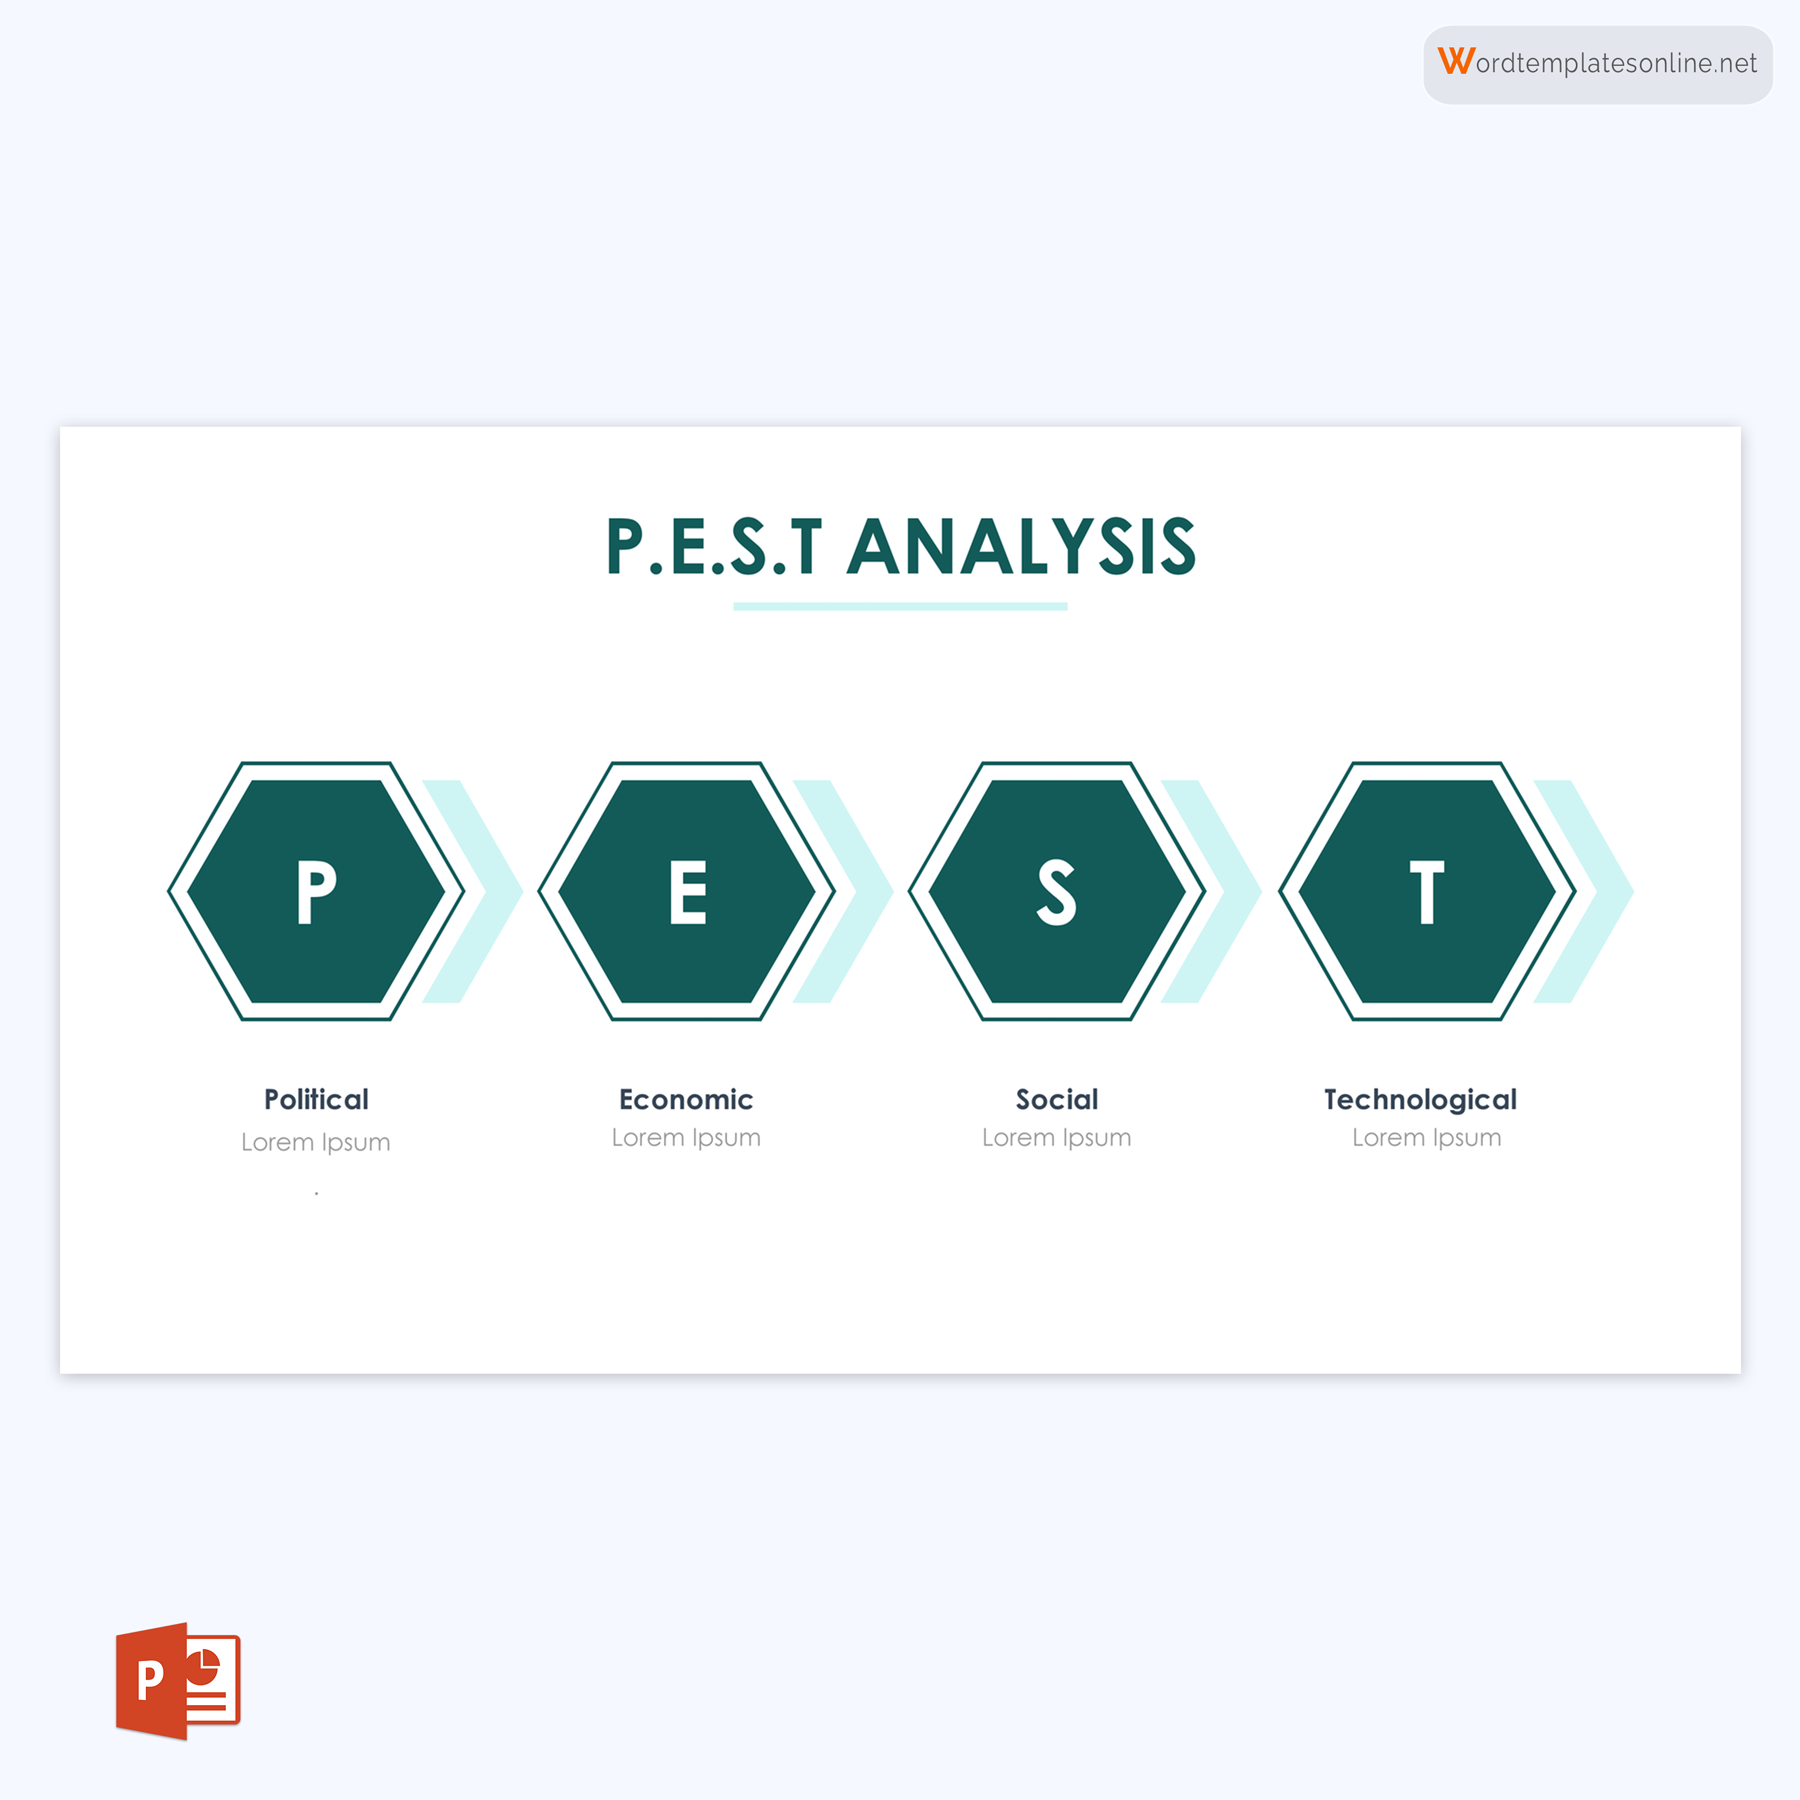 PEST Analysis Presentation Template - Ready-to-Use Format